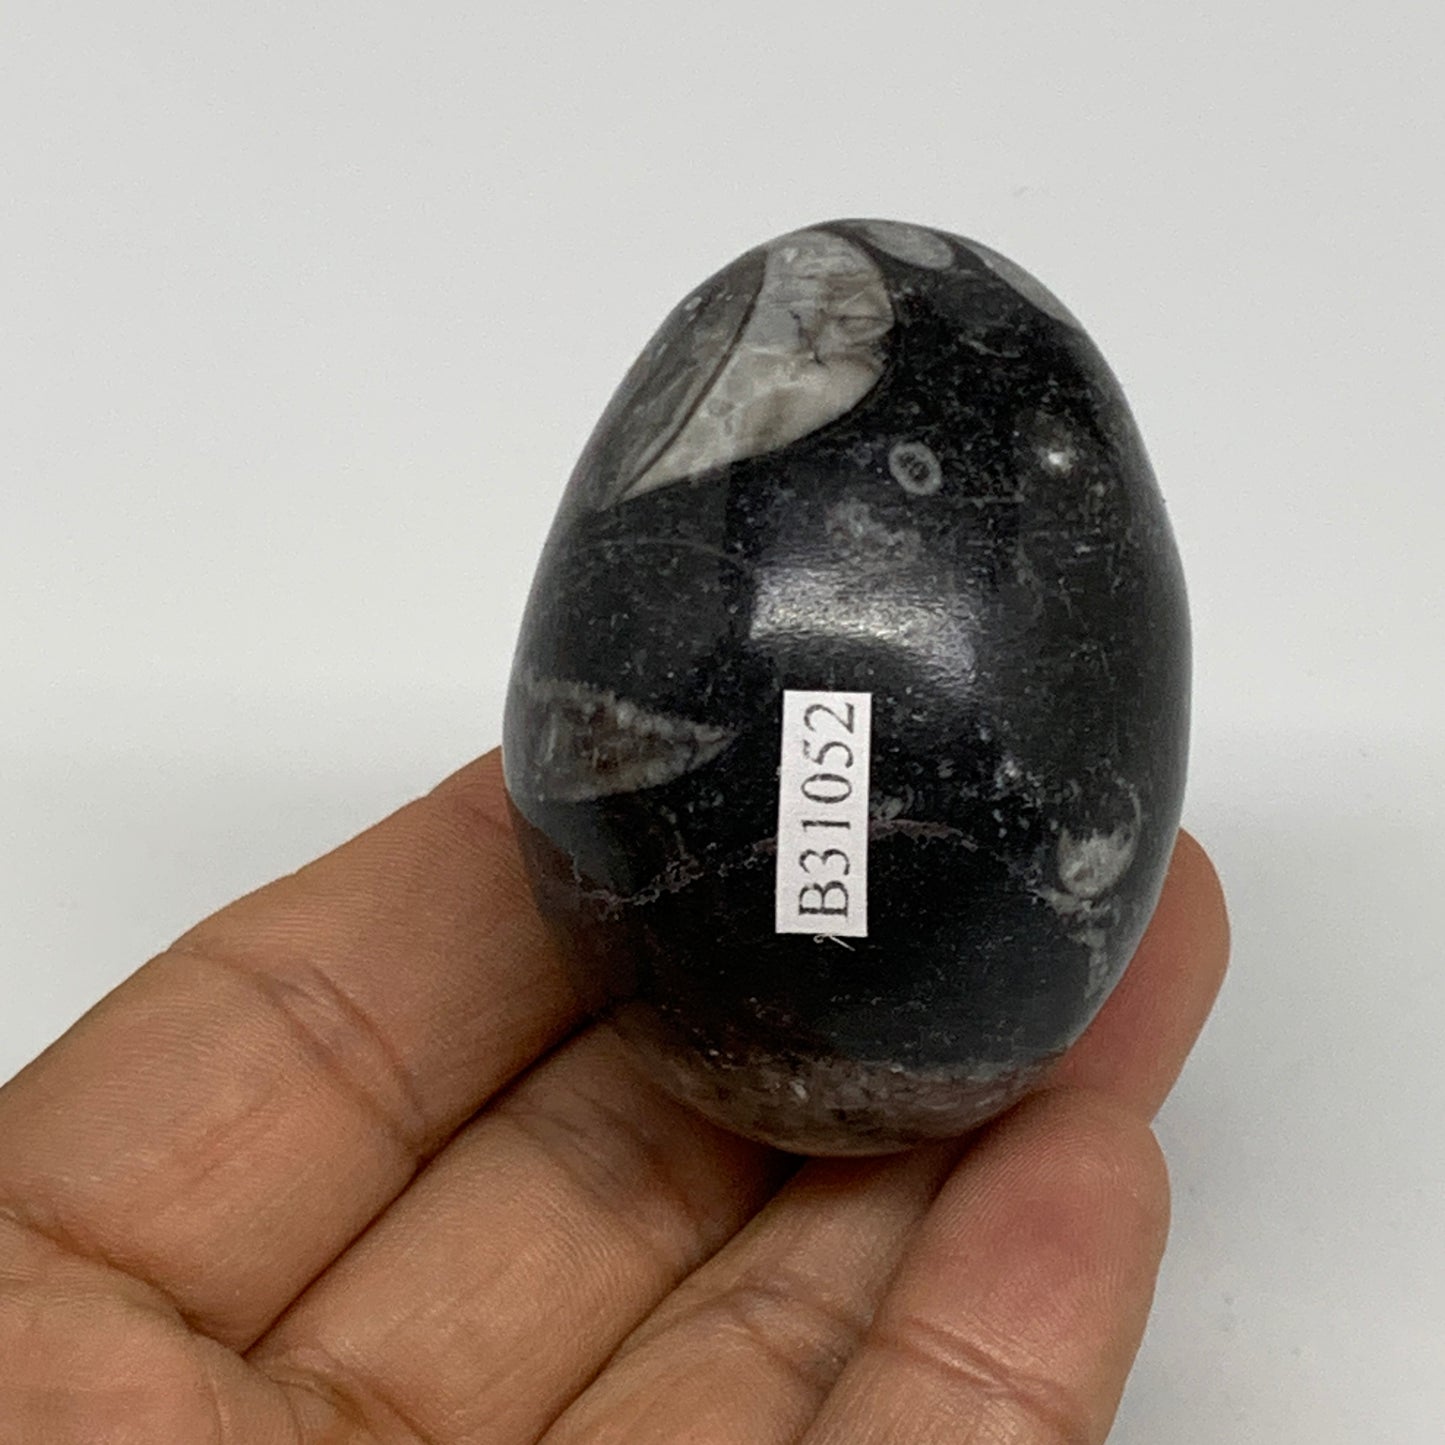 117.3g, 2.1"x1.5", Natural Fossil Orthoceras Stone Egg from Morocco, B31052